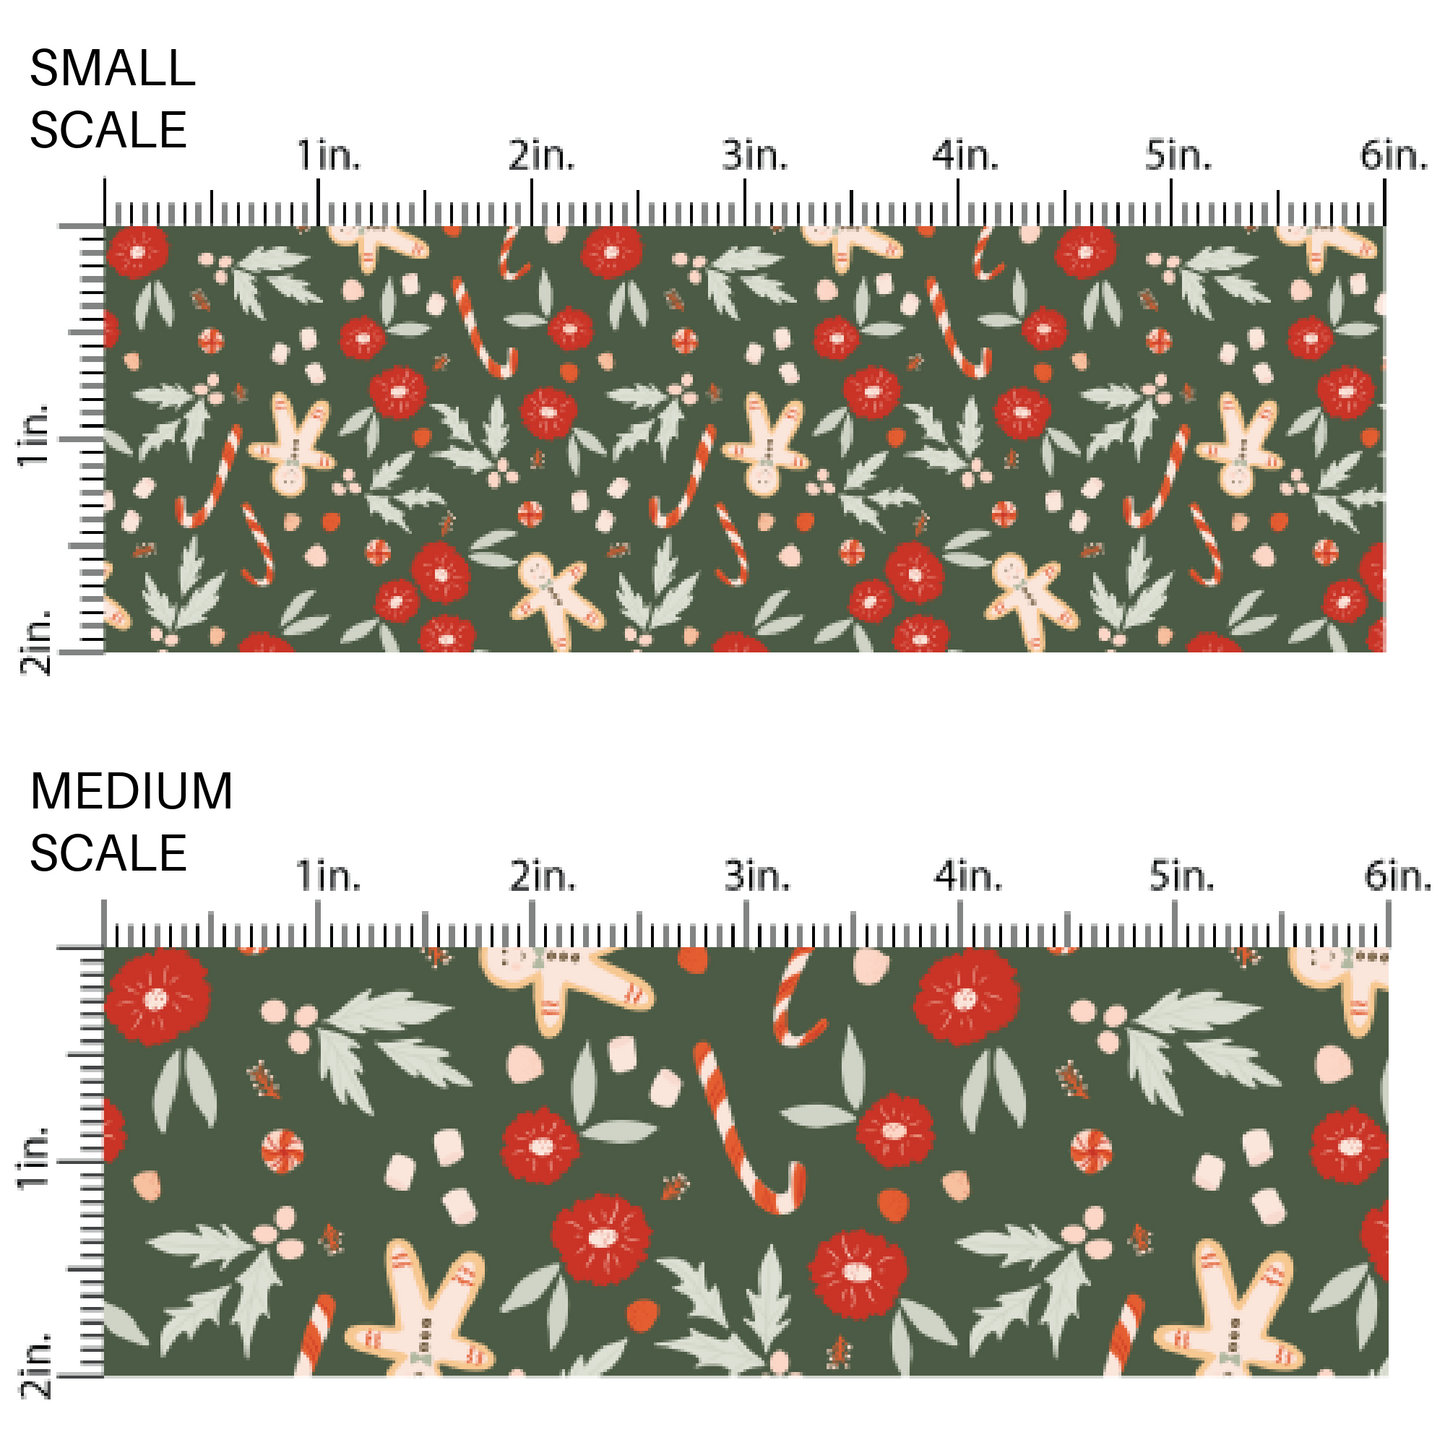 Red and green flowers and plaid pattern high quality fabric adaptable for all your crafting needs. Make cute baby headwraps, fun girl hairbows, knotted headbands for adults or kids, clothing, and more!